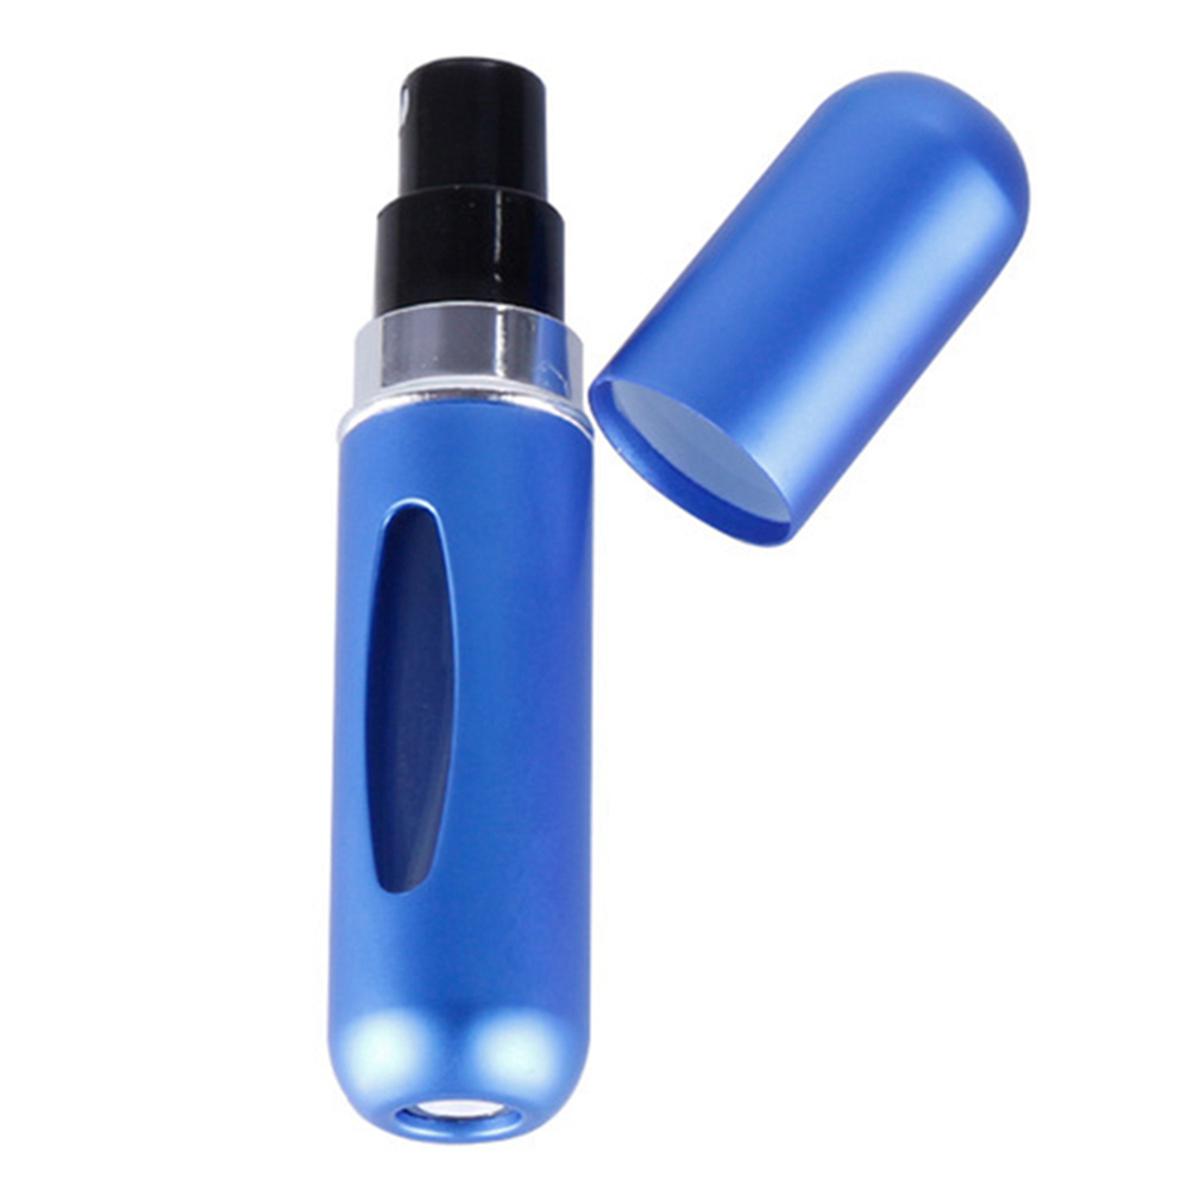 5ml Portable Mini Refillable Perfume Bottle With Spray Scent Pump Empty Cosmetic Containers Spray Atomizer Bottle For Travel